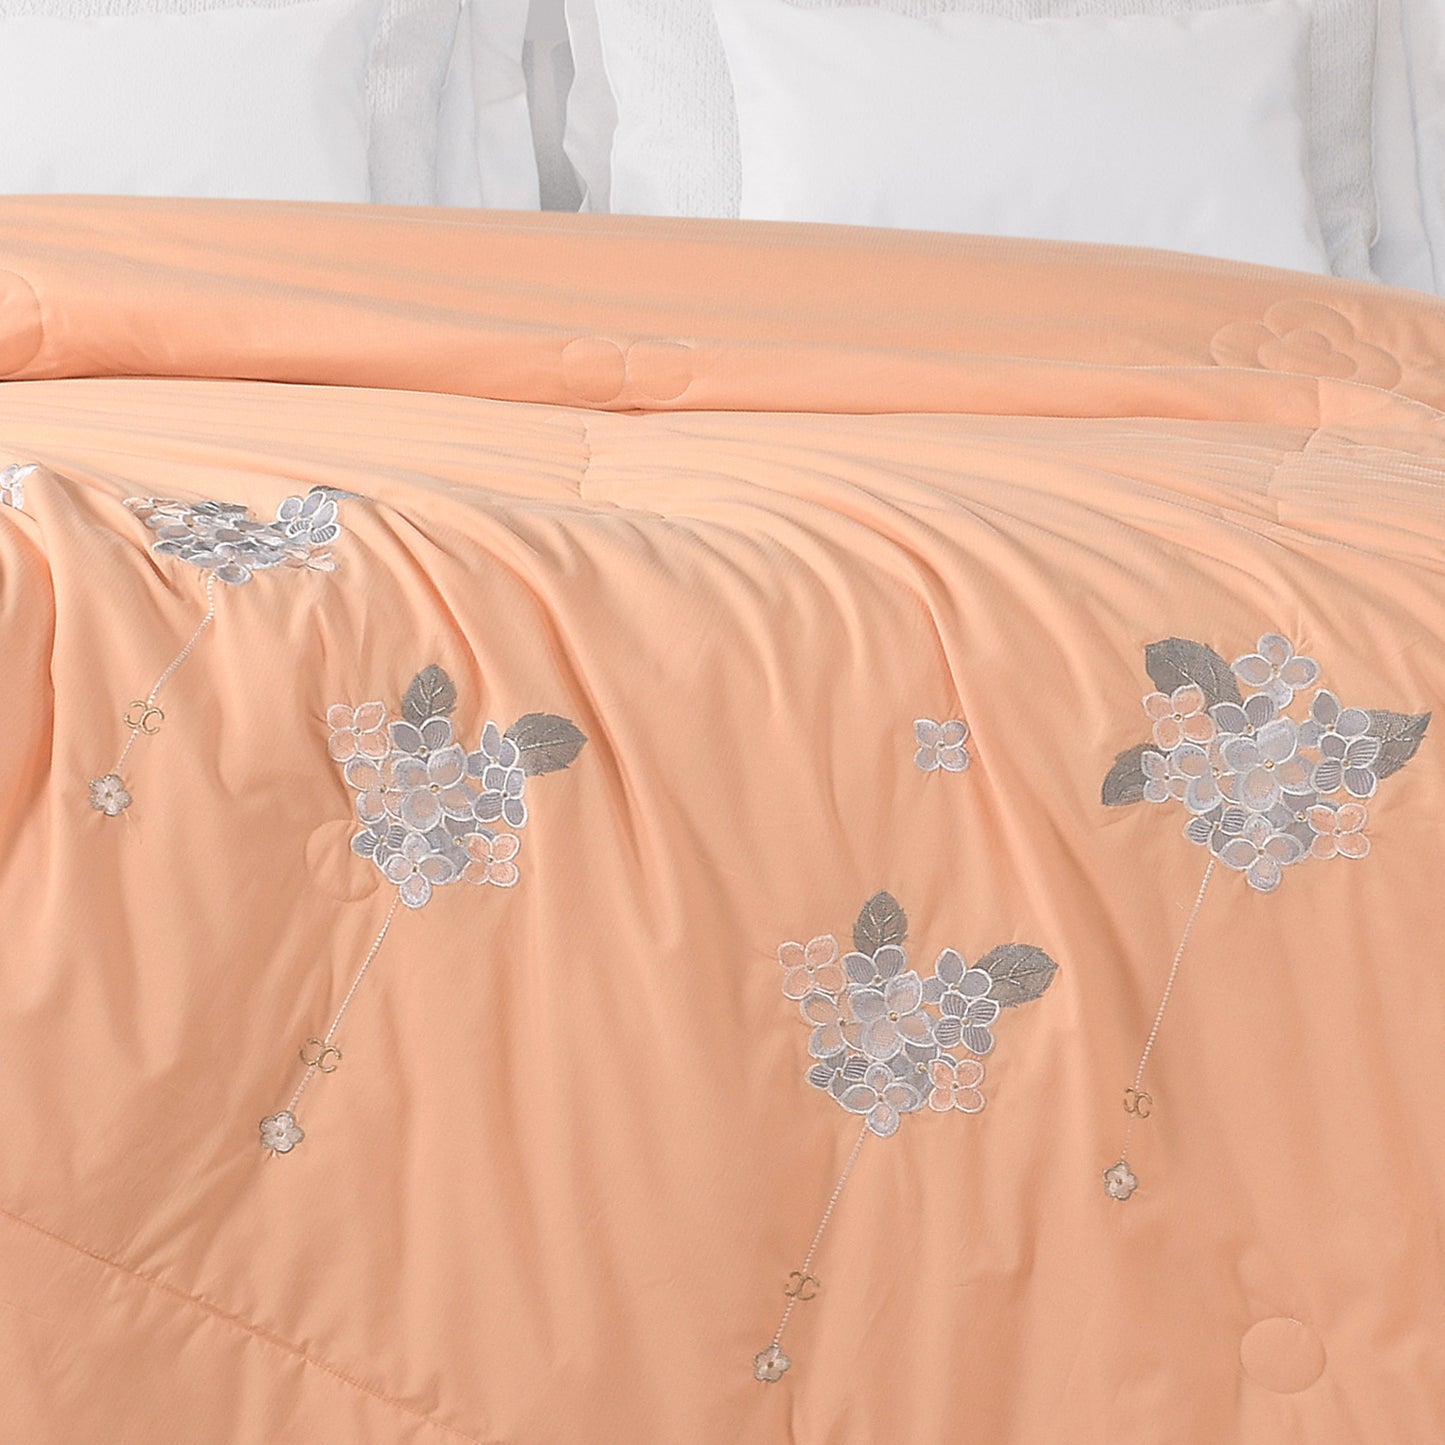 Dalton Comforter Collection By Ross